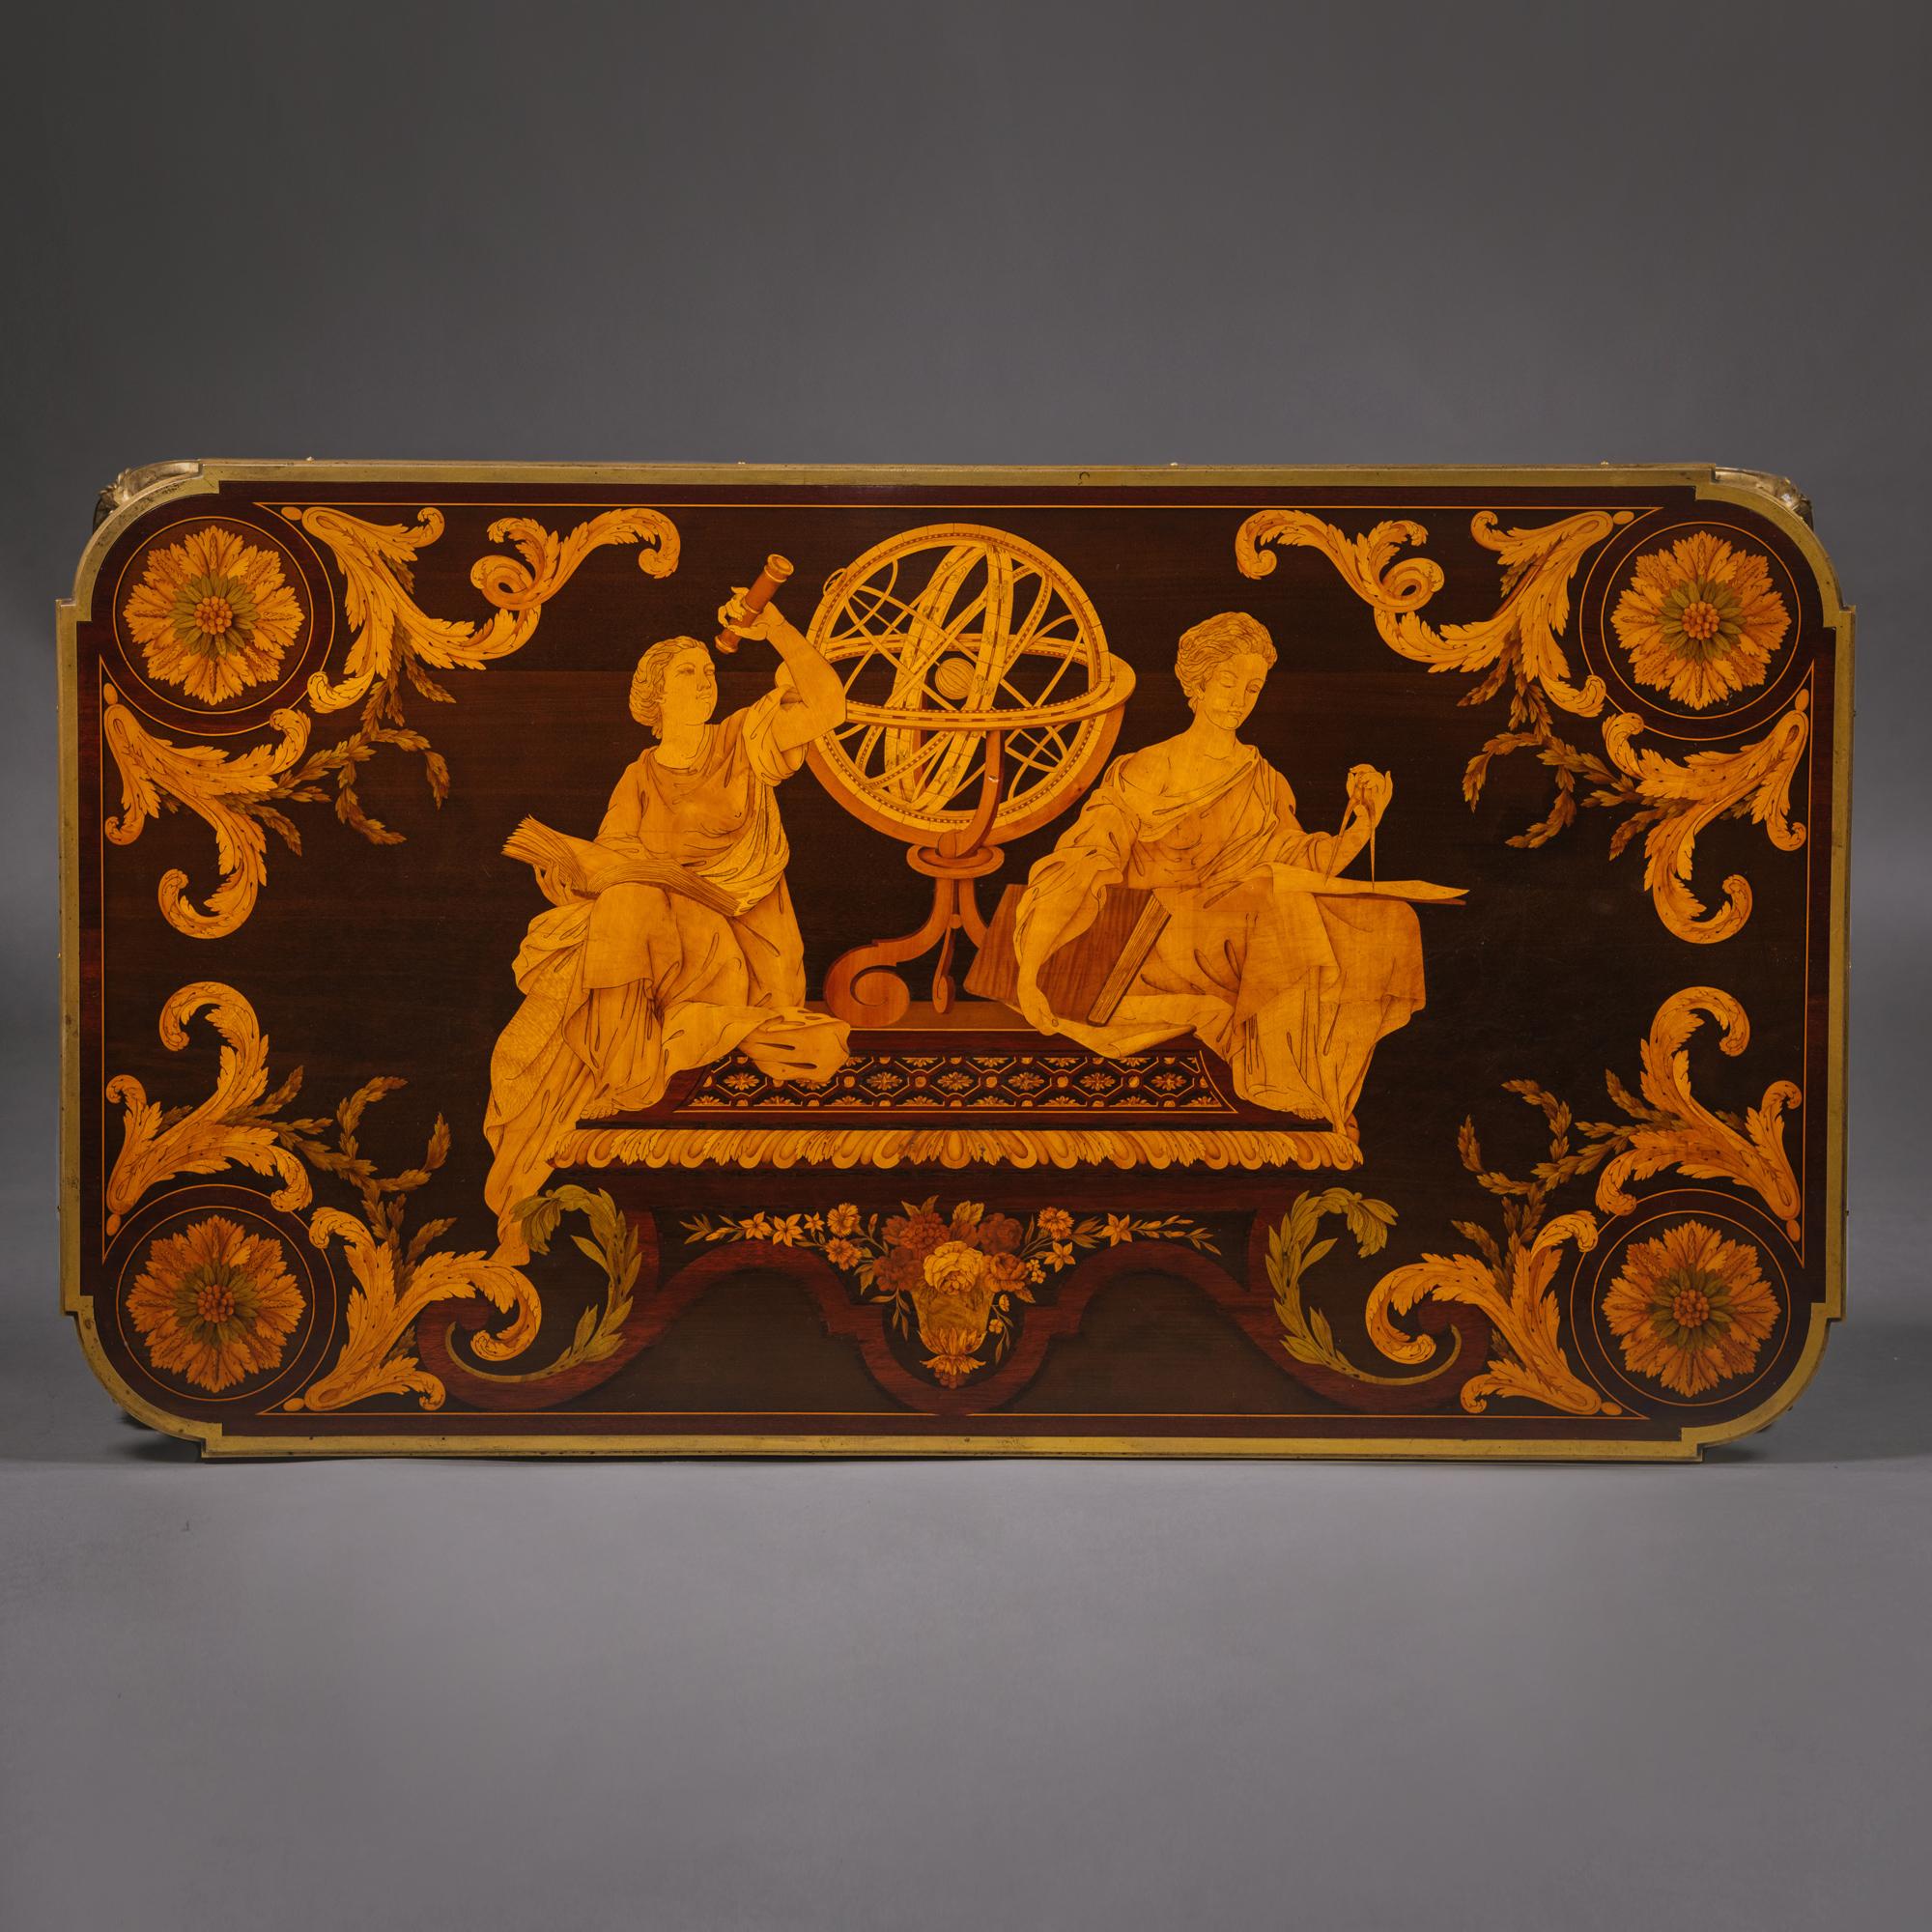 ‘Table des Muses’
A Louis XVI Style Gilt-Bronze Mounted Marquetry Centre Table 
By Emmanuel-Alfred (Dit Alfred II) Beurdeley, After The Model By Jean-Henri Riesener.

 Stamped ‘A BEURDELEY A PARIS’

The elaborate marquetry top depicts an